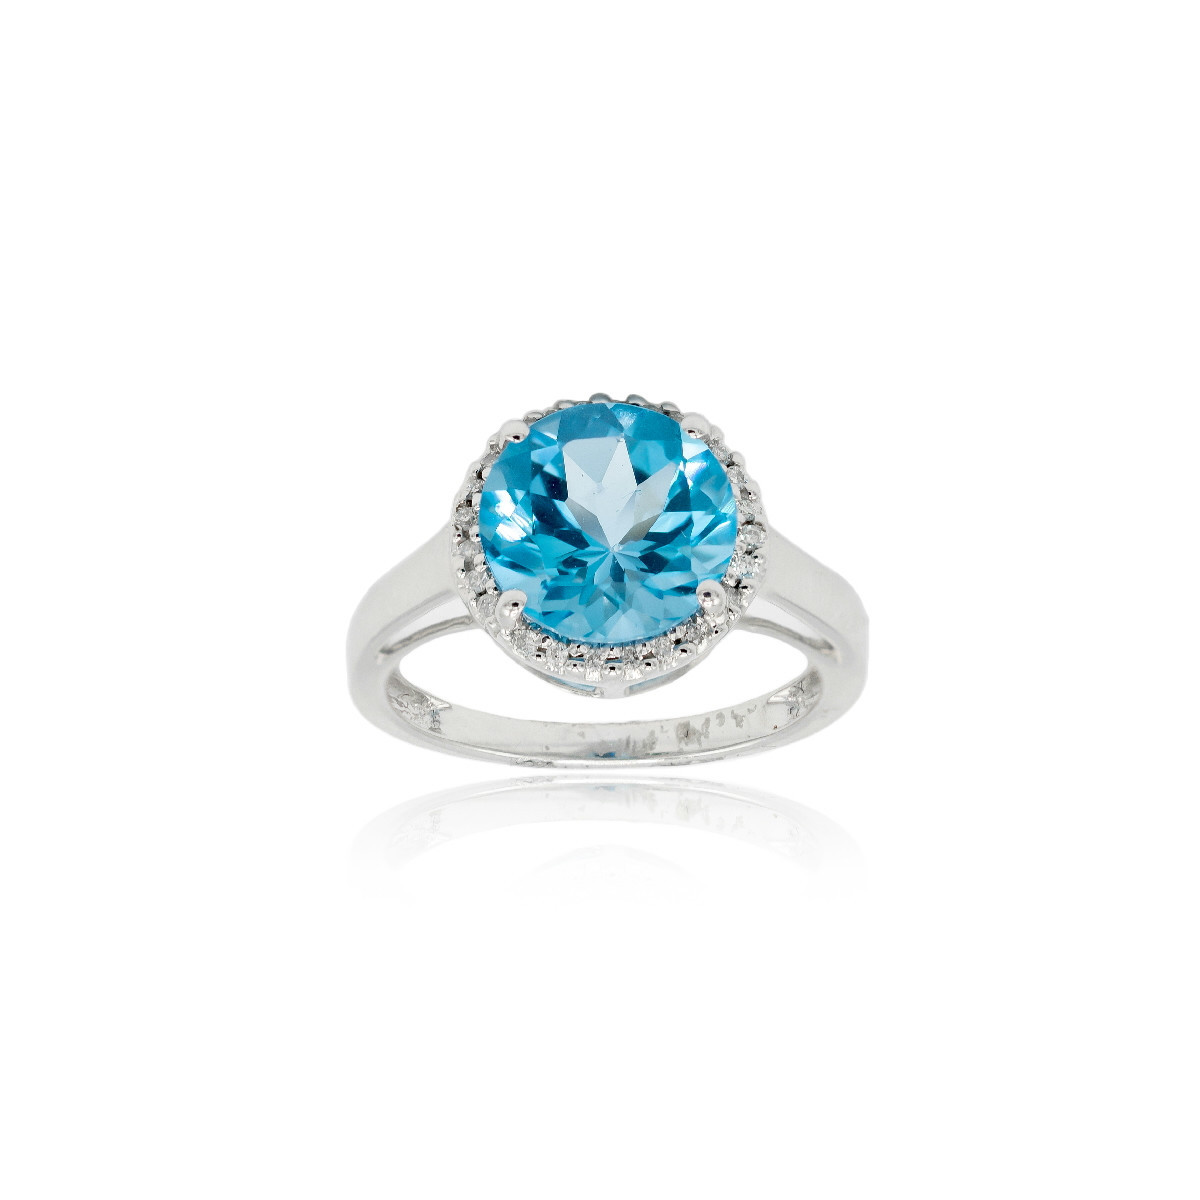 White Gold and Topaz Ring